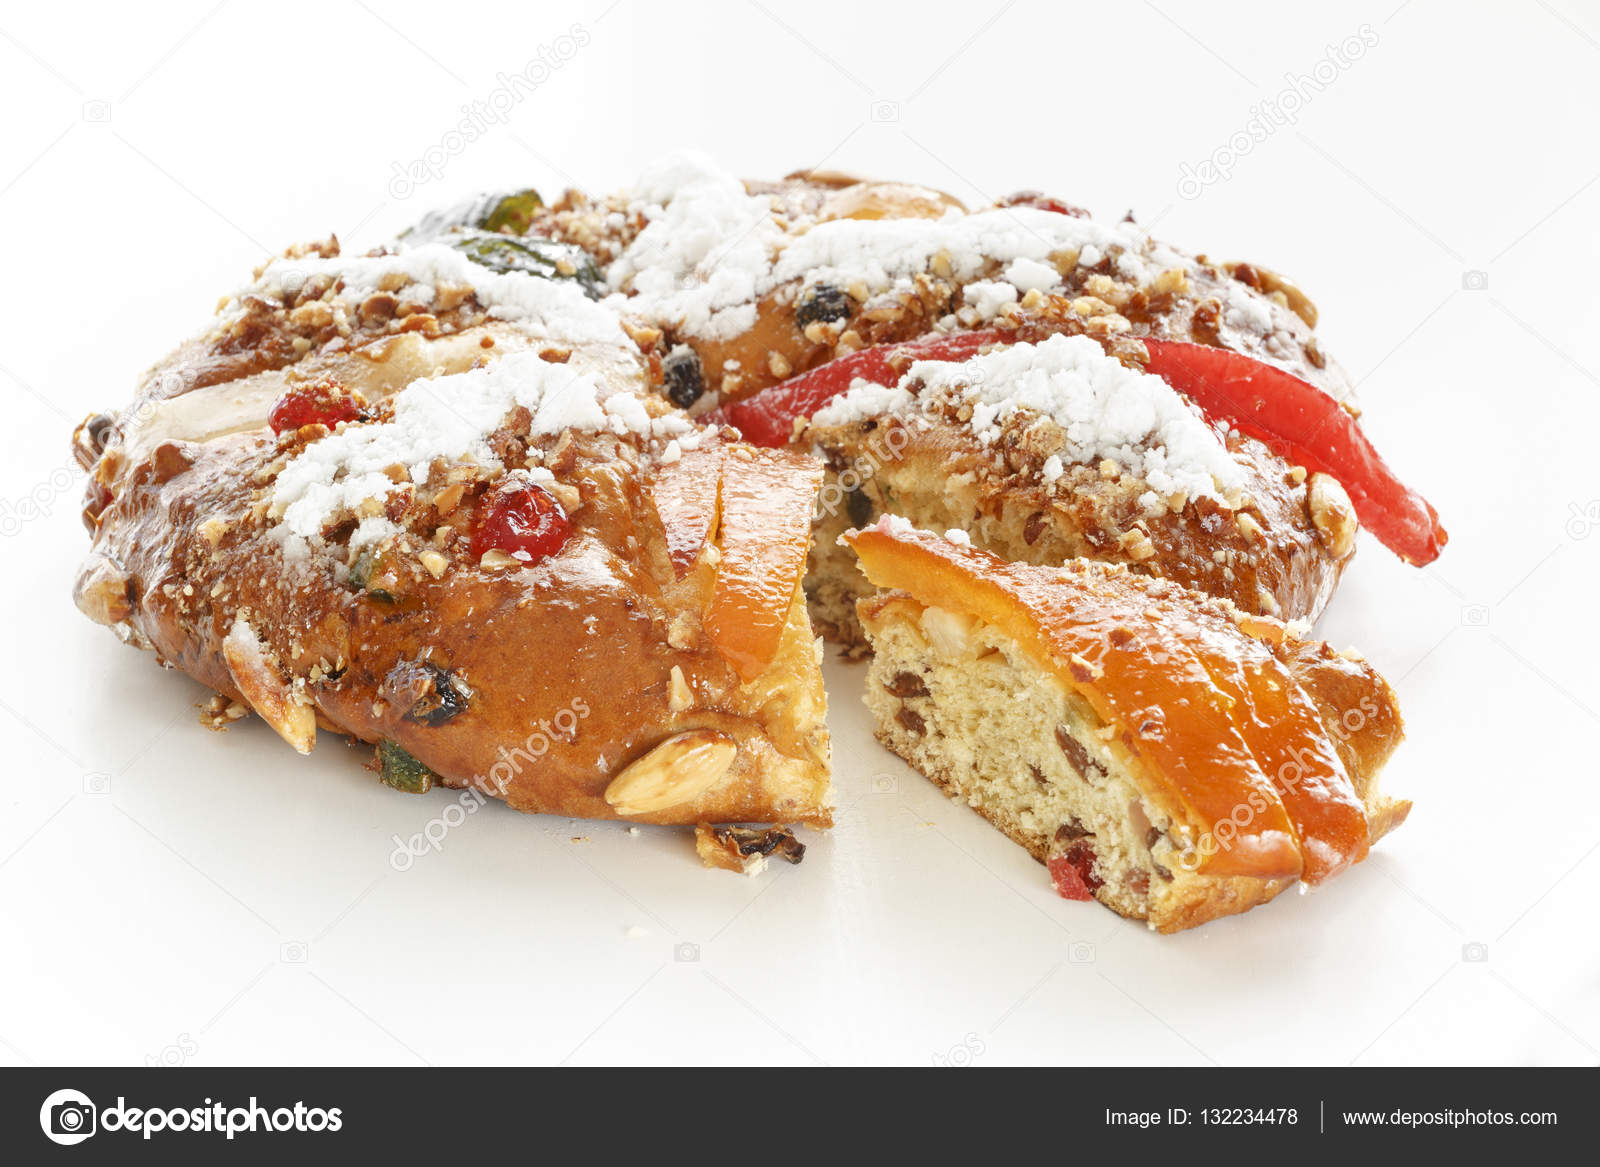 Bolo Rei is a traditional portuguese Christmas cake made with